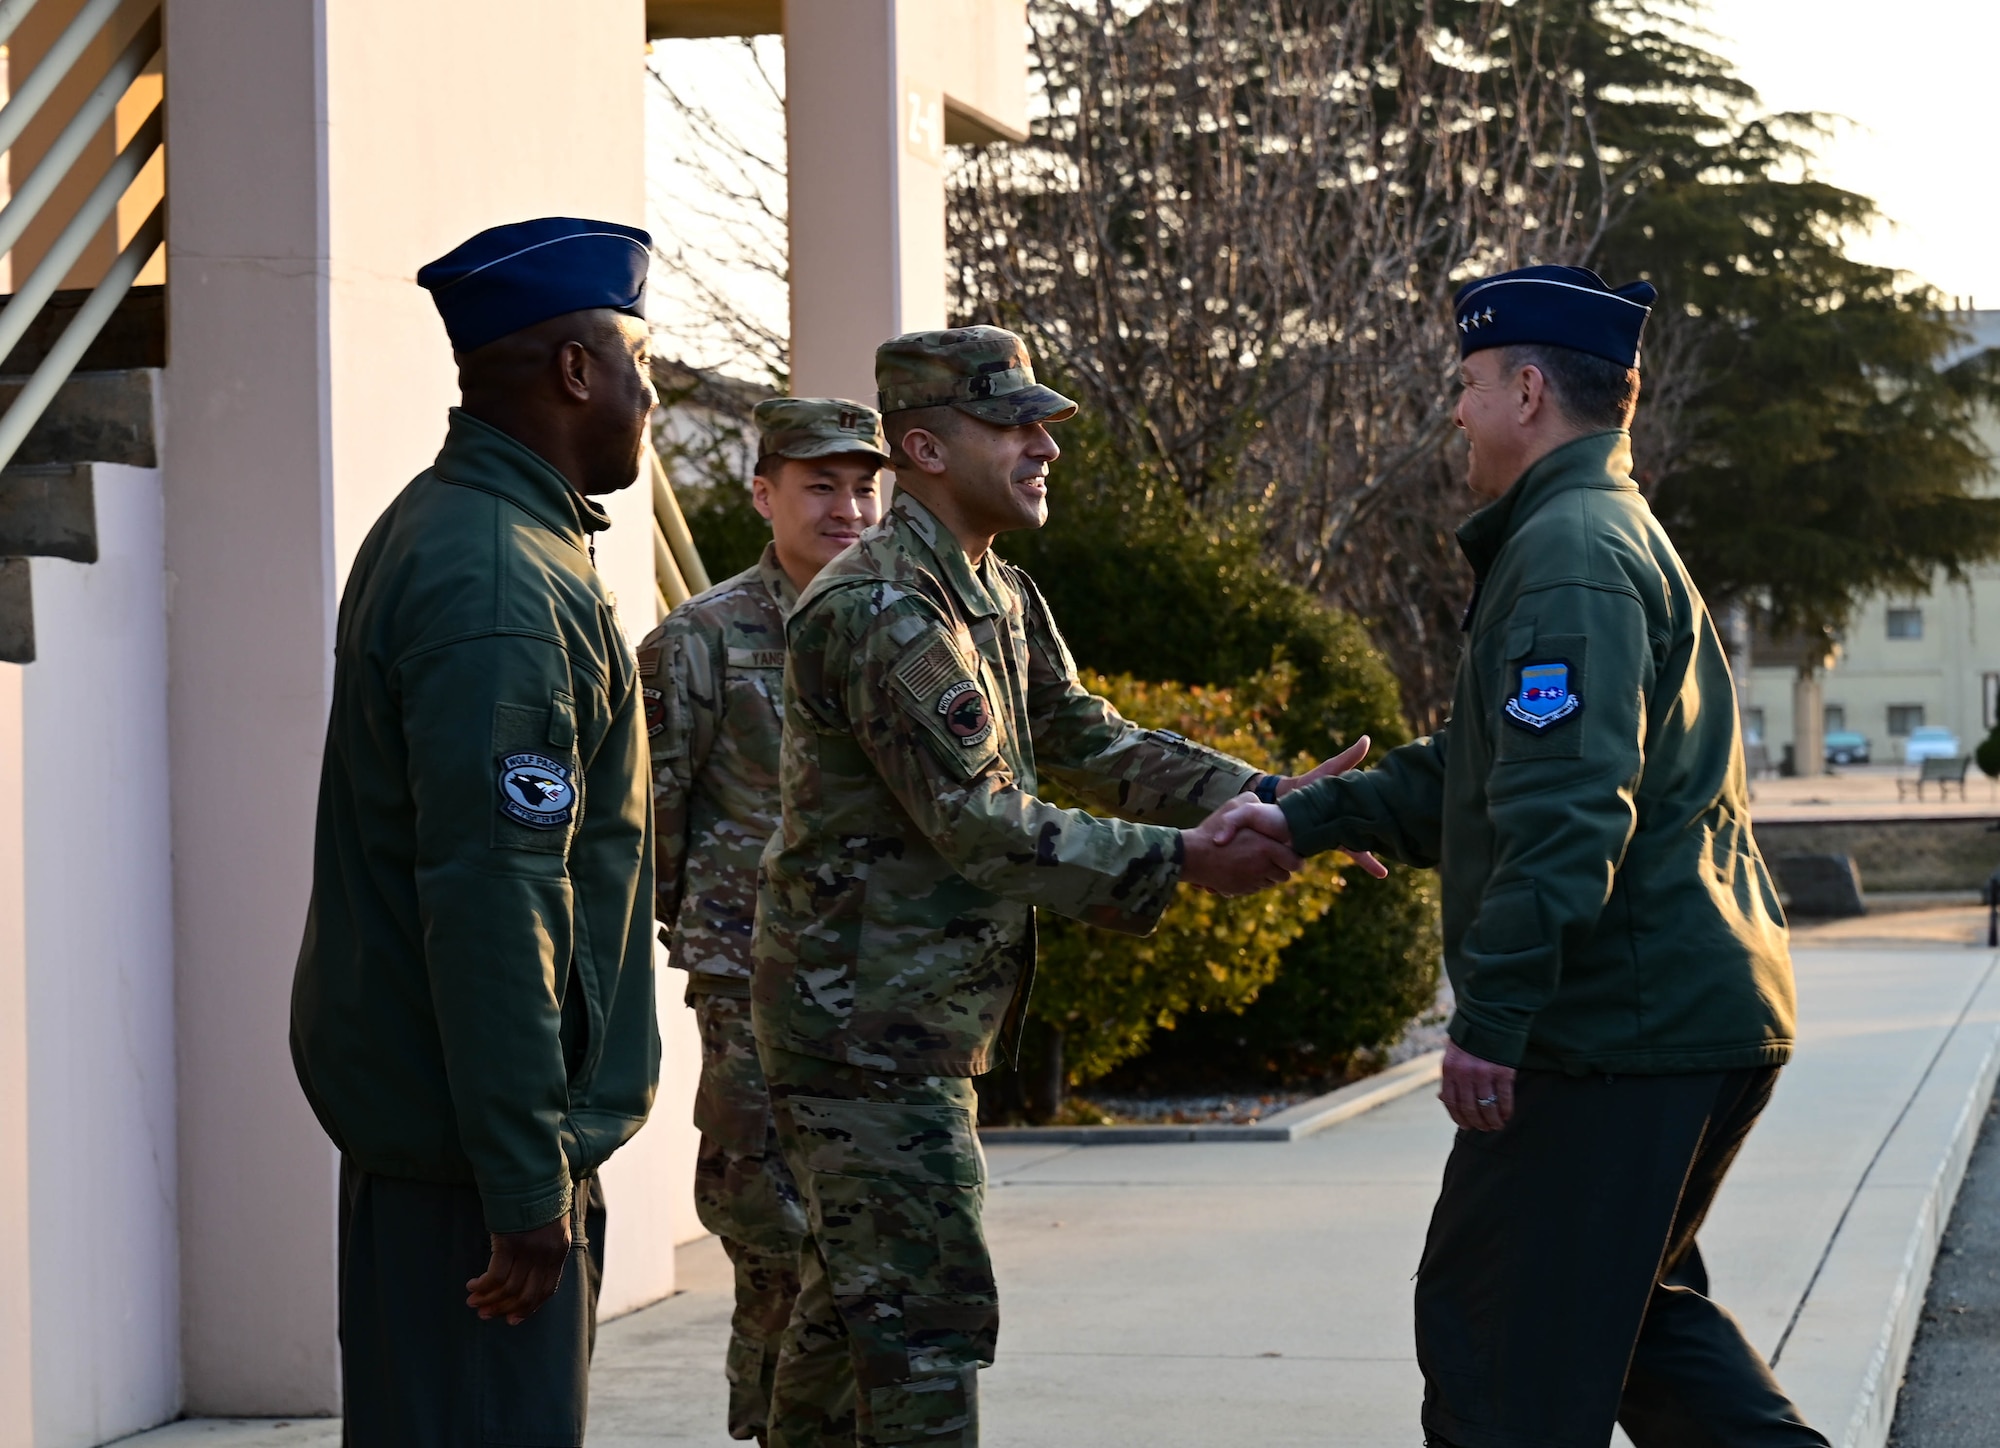 Chief Master Sgt. Carlos “Wolf Chief” Damian (left), 8th Fighter Wing command chief, shakes hands with Lt. Gen. Scott “Rolls” Pleus, 7th Air Force commander, during the Wolf Leadership Forum at Kunsan Air Base, Republic of Korea, Feb. 23, 2023. As part of the Wolf Leadership Forum, former leaders of Kunsan Air Base returned to visit and learn about how the Wolf Pack currently operates. (U.S. Air Force photo by Senior Airman Shannon Braaten)